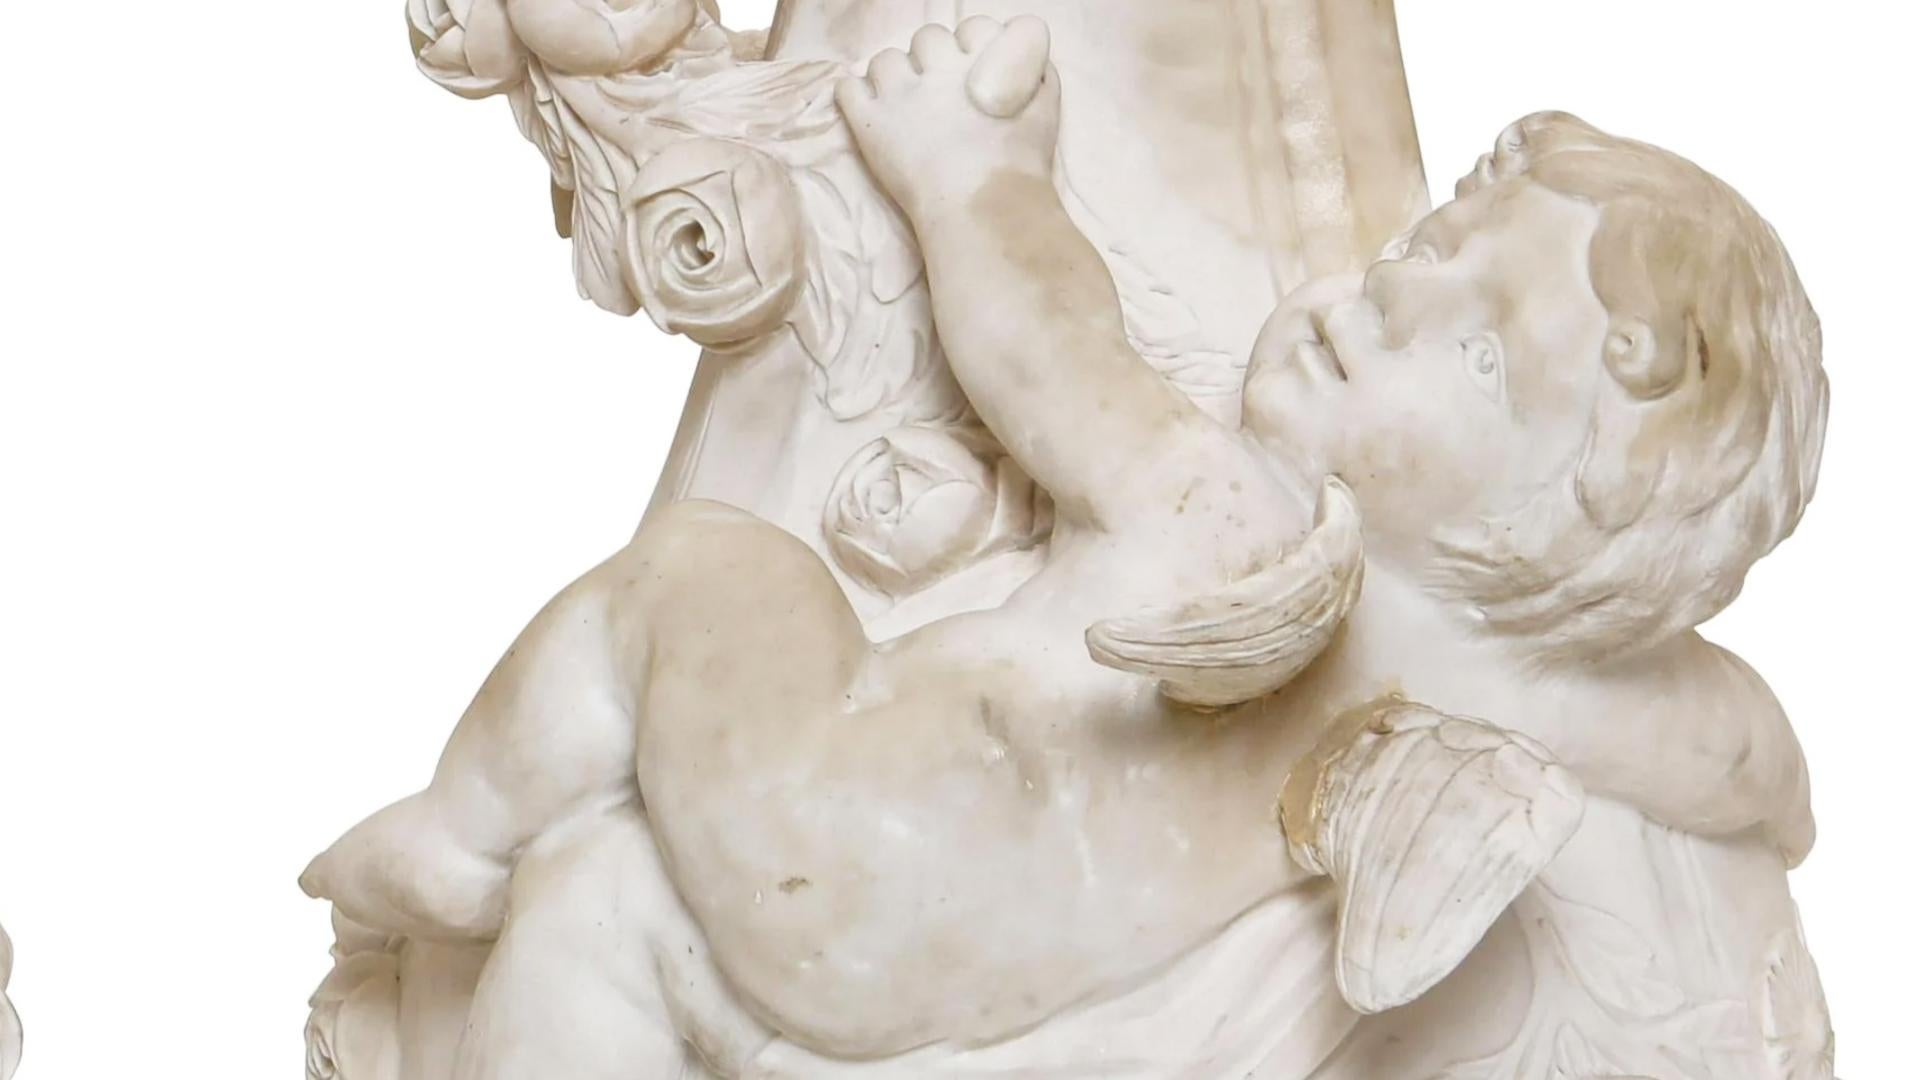 Hand-Carved Pair of Marble Urns with Cherubs, Signed A. Moreau